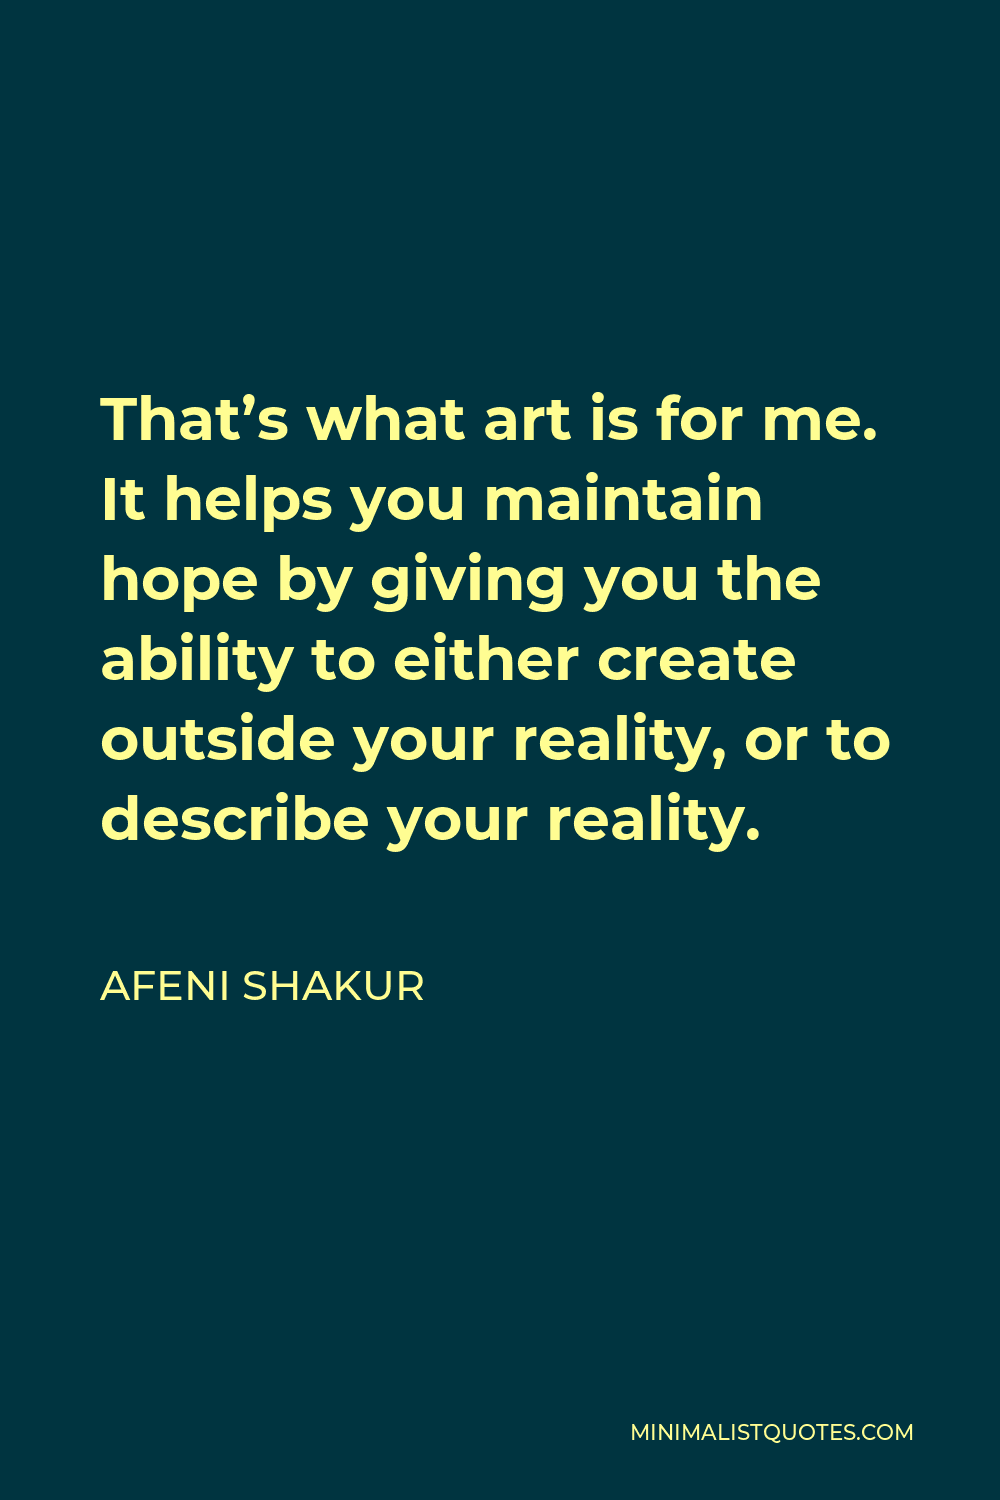 Afeni Shakur Quote - That’s what art is for me. It helps you maintain hope by giving you the ability to either create outside your reality, or to describe your reality.